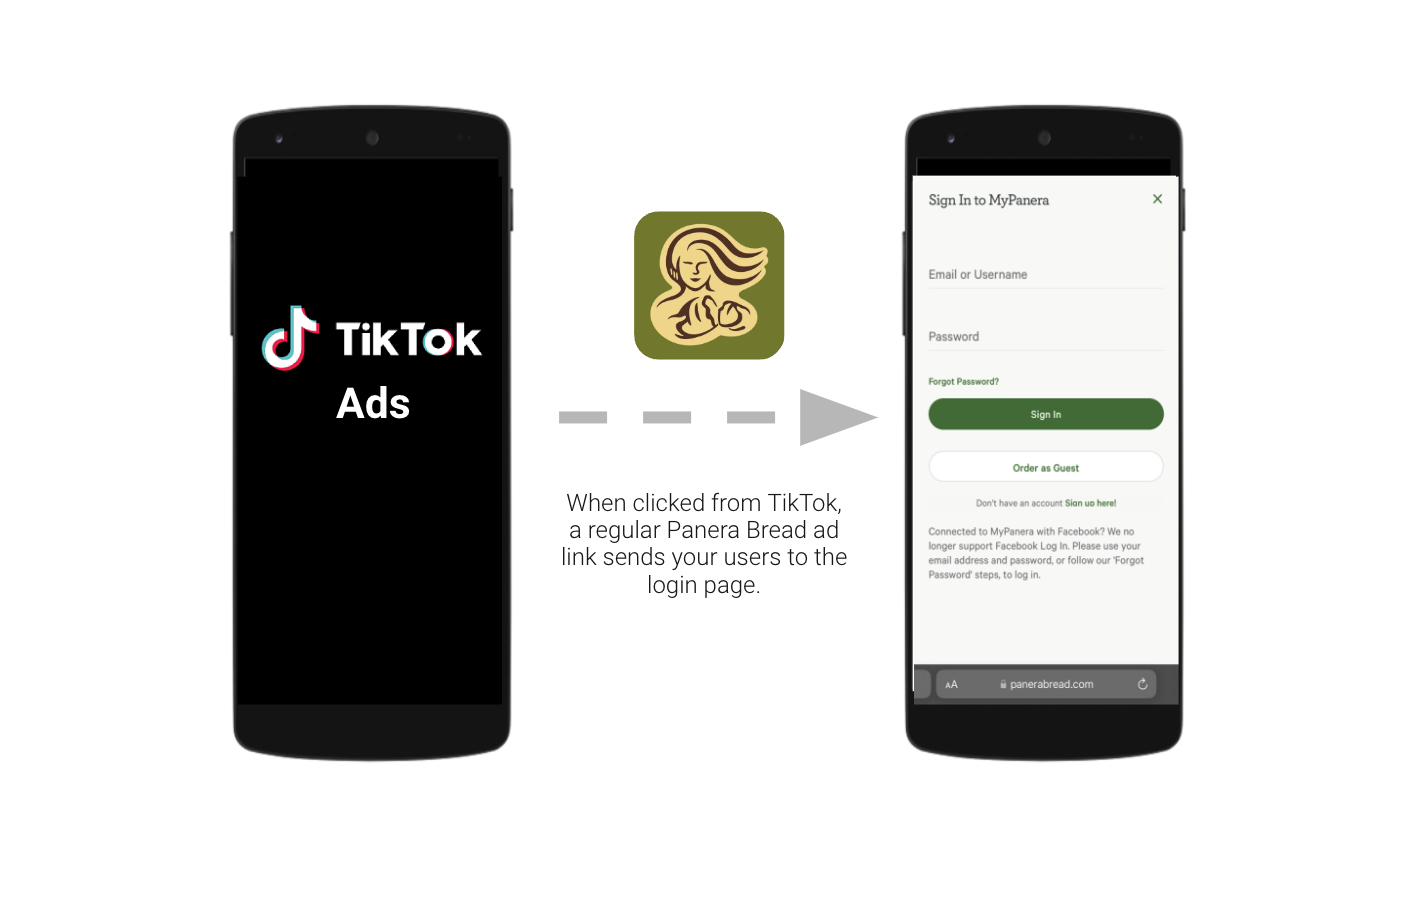 How to Measure App Installs and App Engagement from TikTok Ads